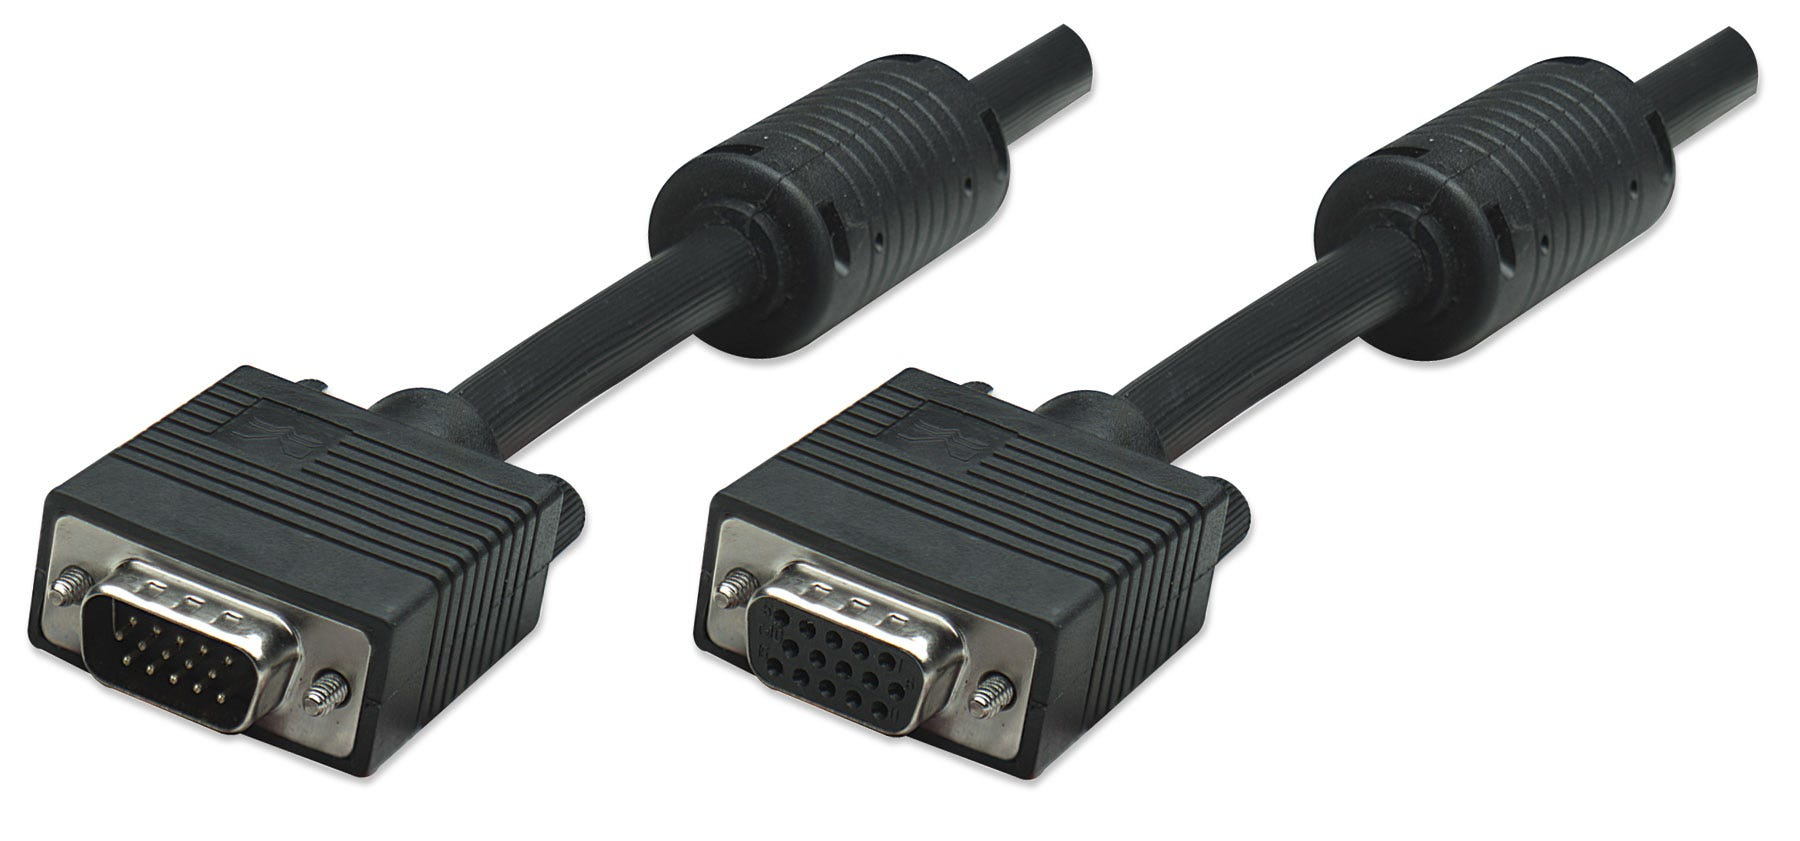 Manhattan VGA Extension Cable (with Ferrite Cores), 1.8m, Black, Male to Female, HD15, Cable of higher SVGA Specification (fully compatible)